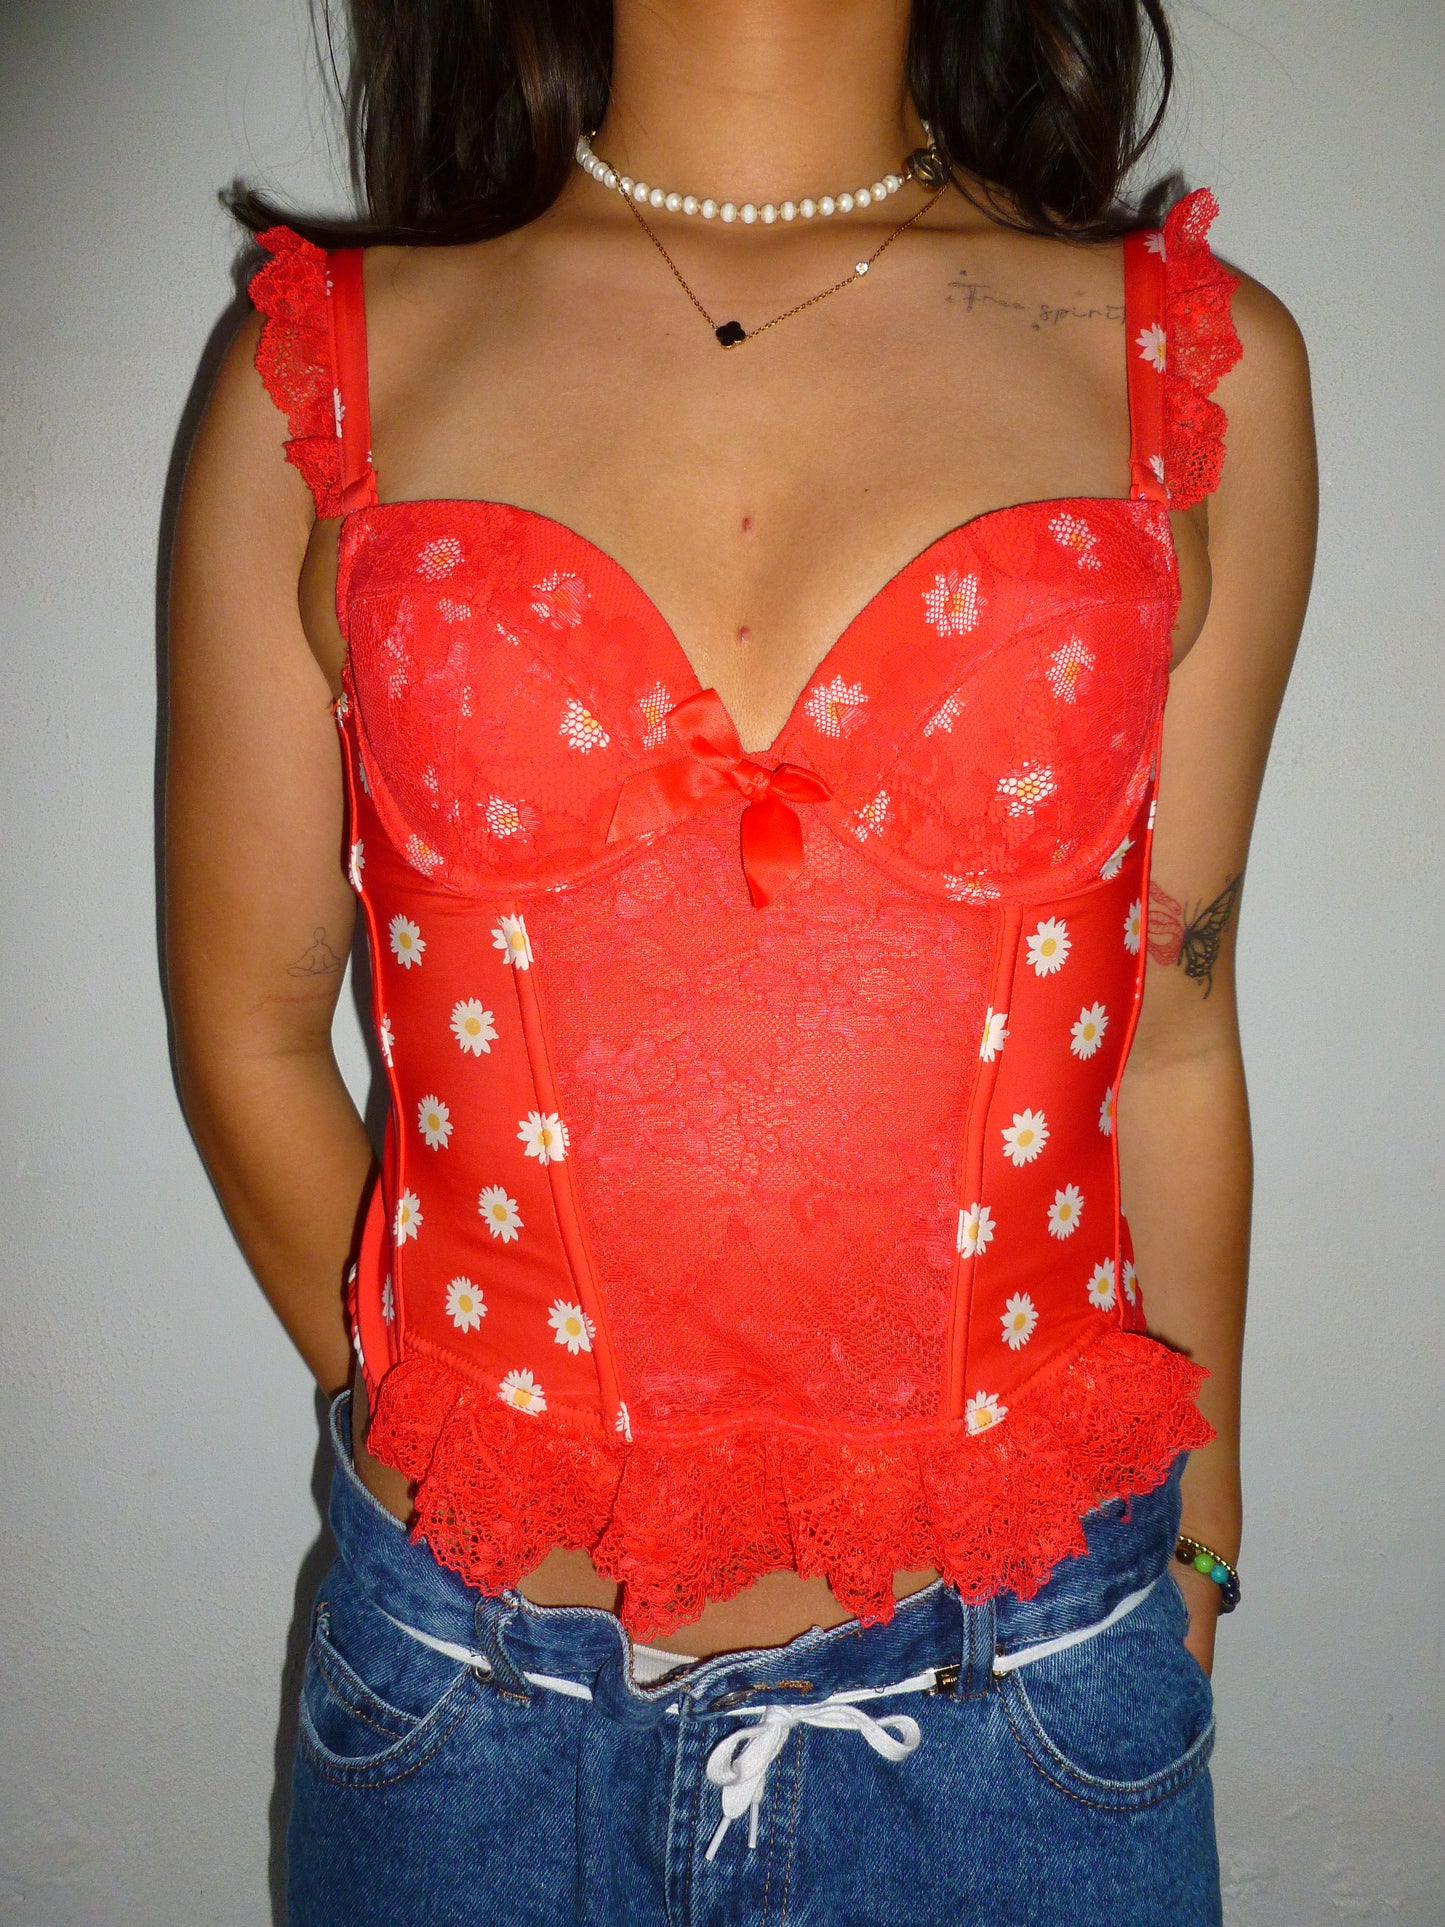 Red lace daisy corset